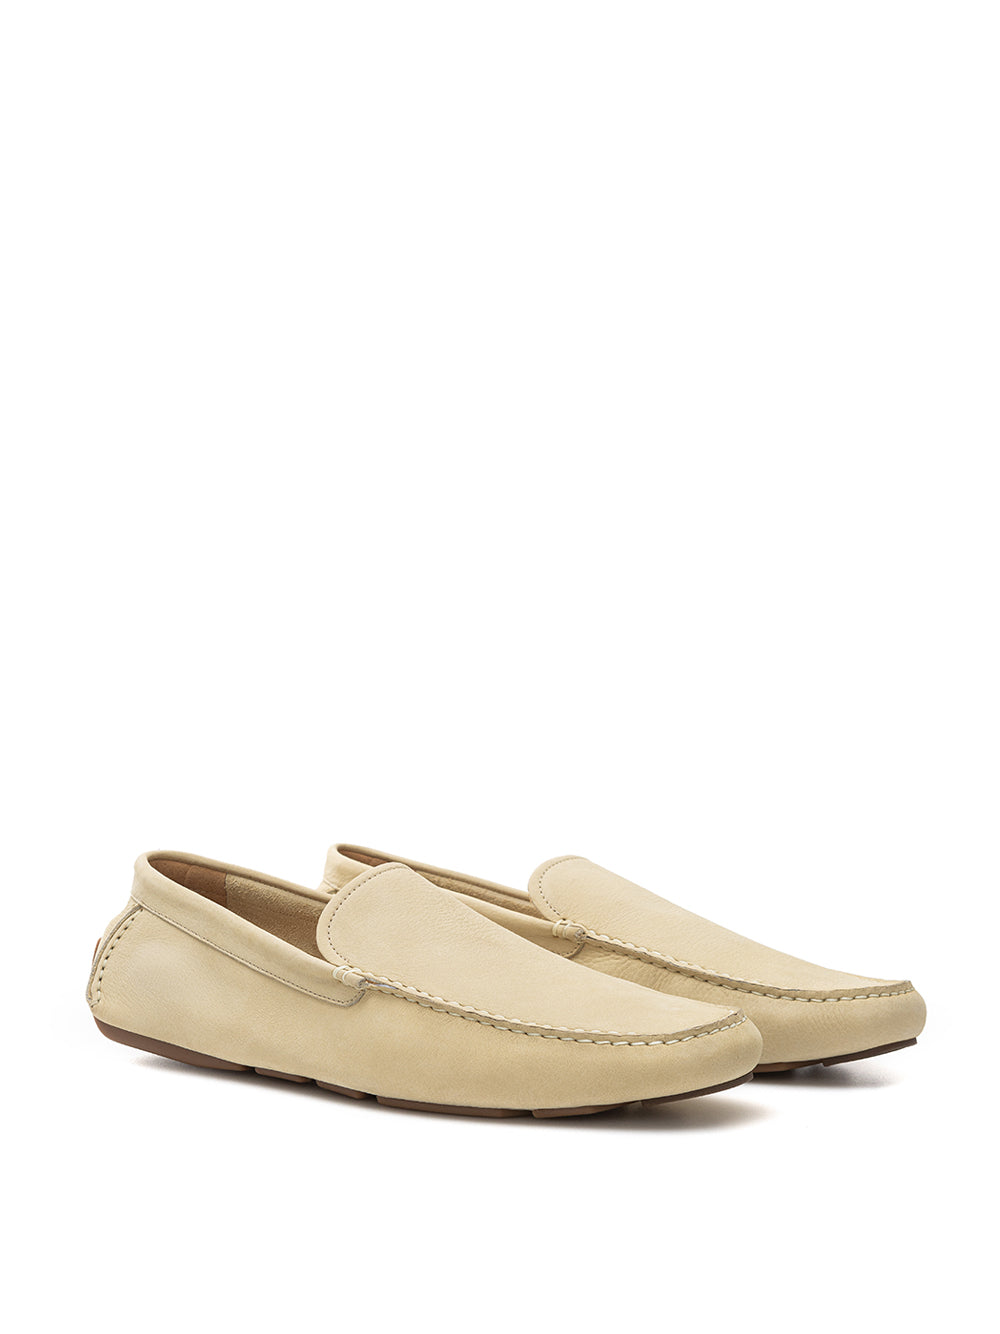 Beige Bally suede moccasin